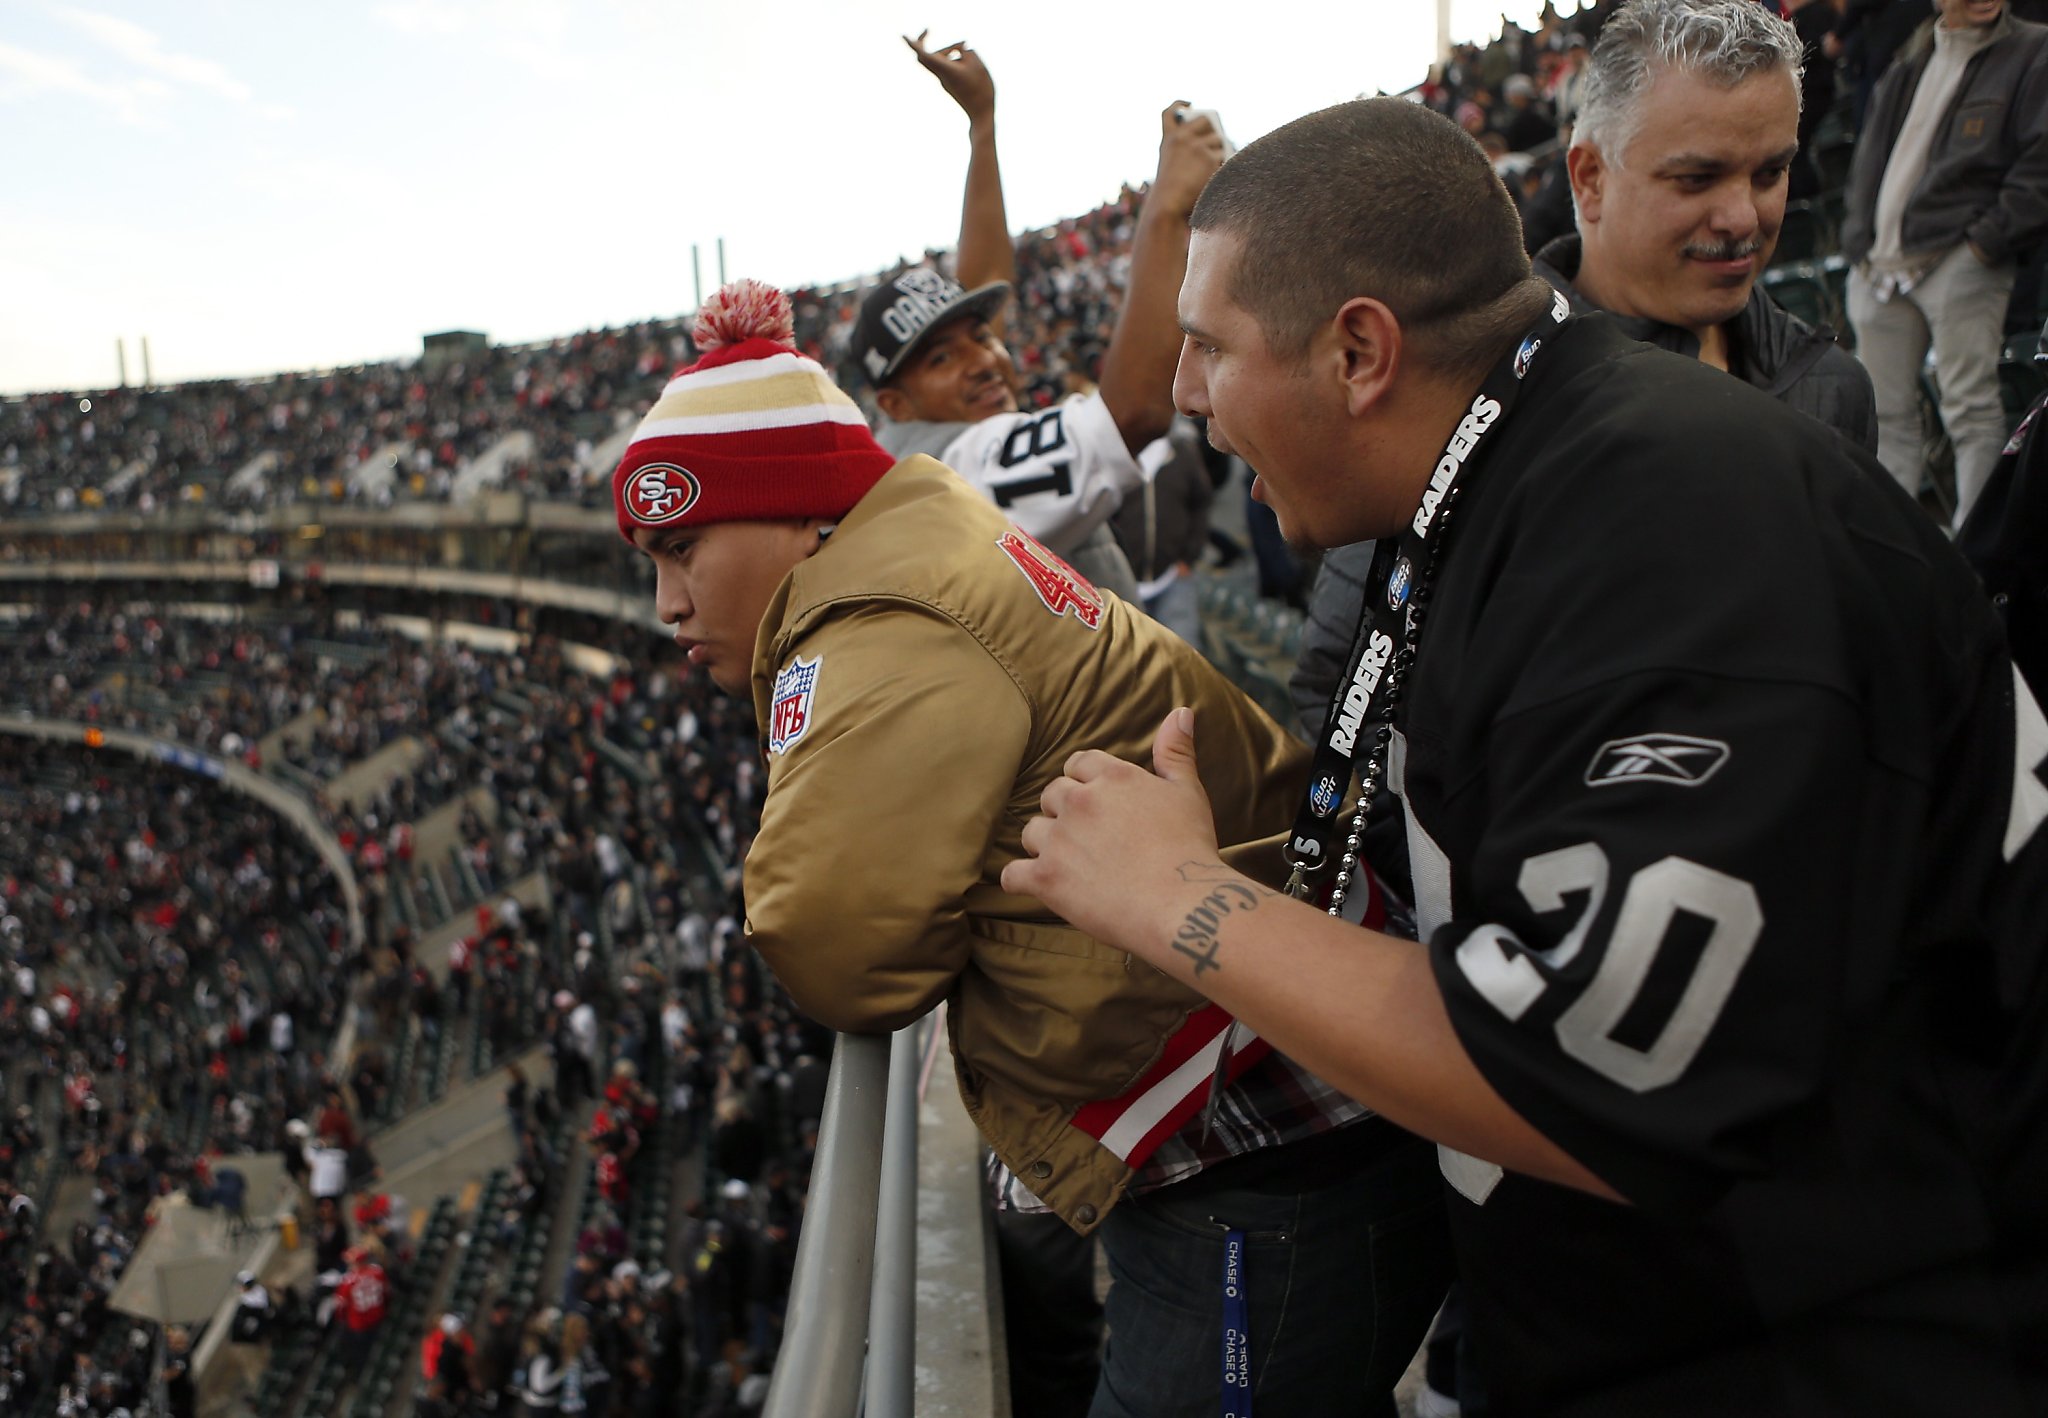 Raiders, Niners fans mellowed by mutual love of football, food - SFGate